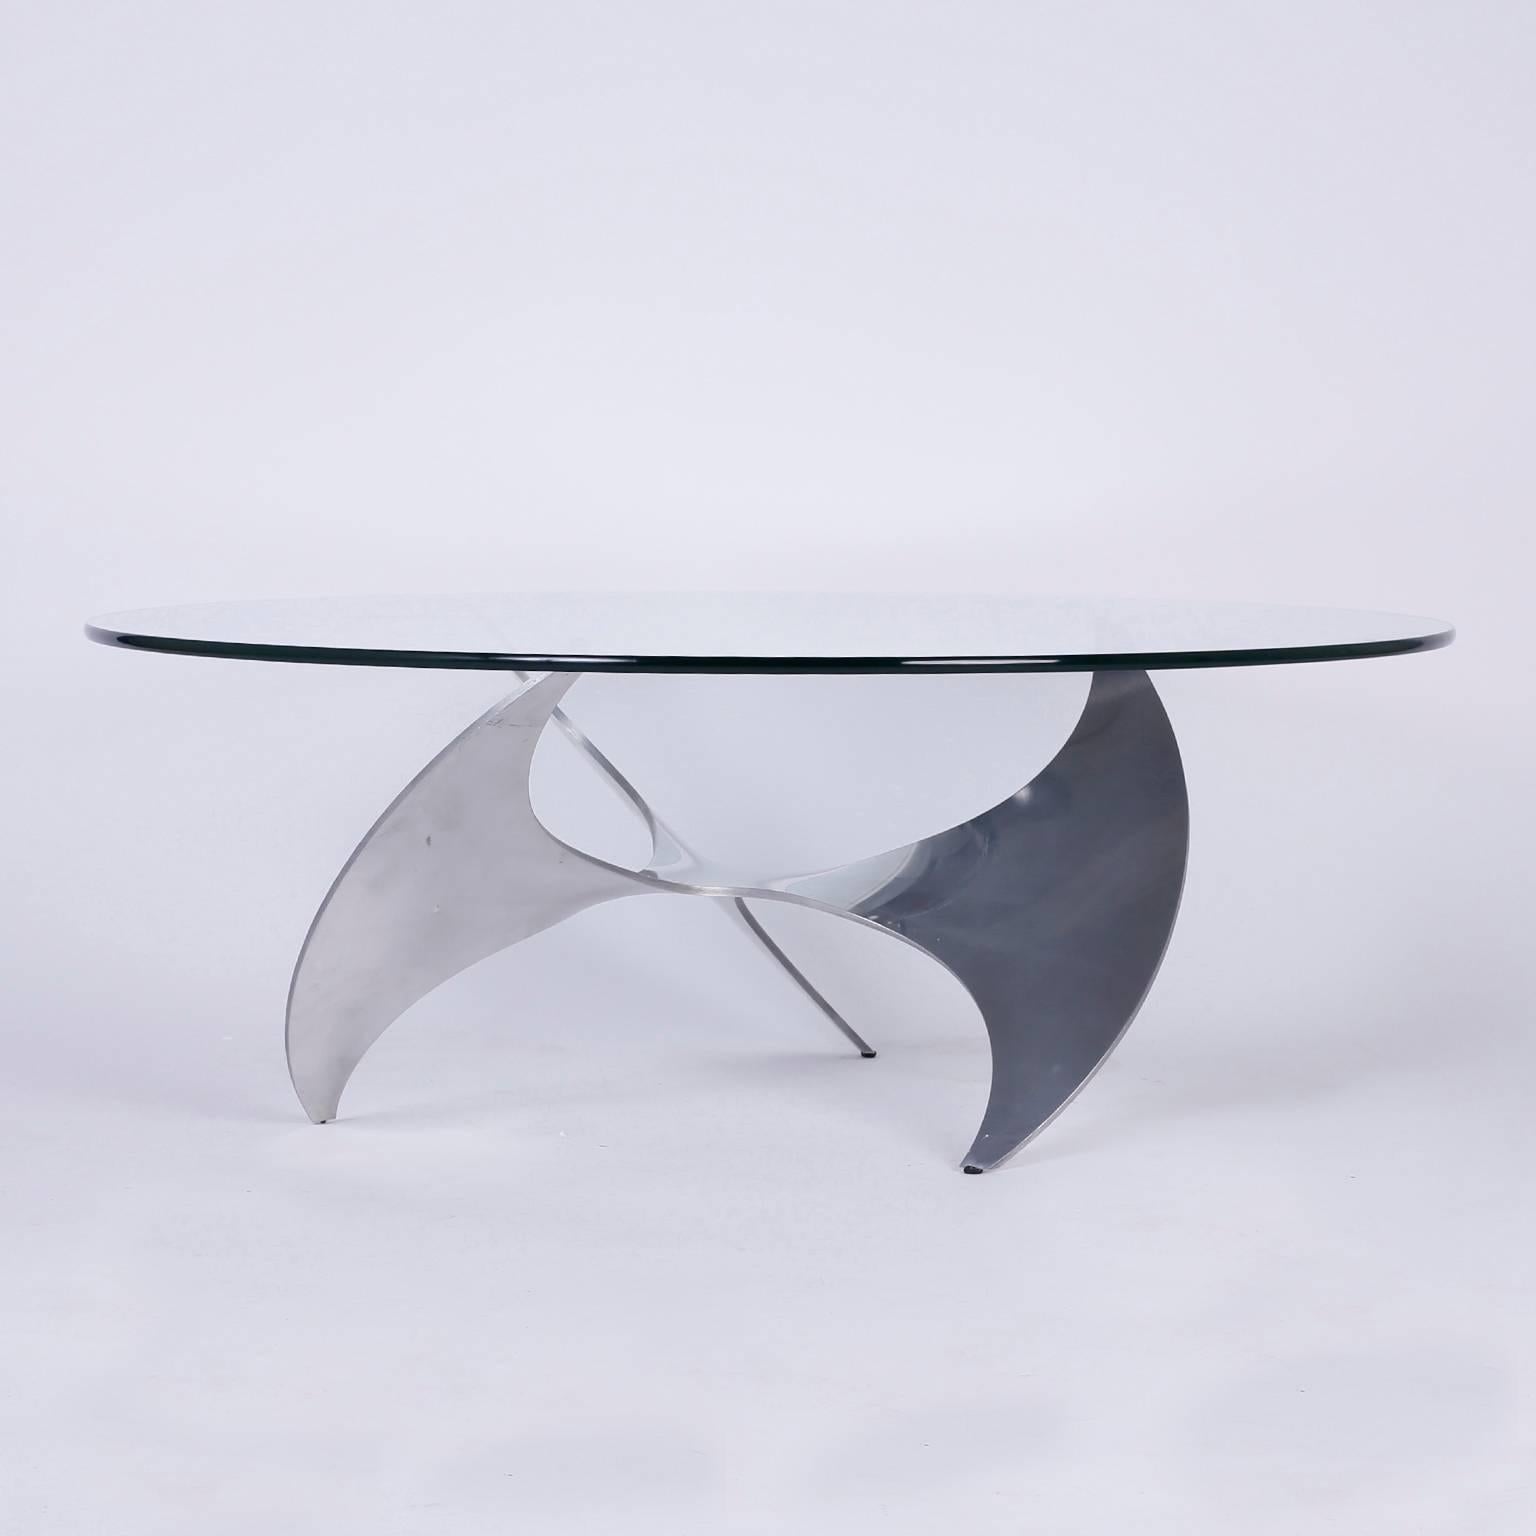 Iconic Propeller shaped coffee or cocktail table by Knut Hesterberg with a round glass top and a cast aluminum base. Perfect combination of Industrial and vogue design.